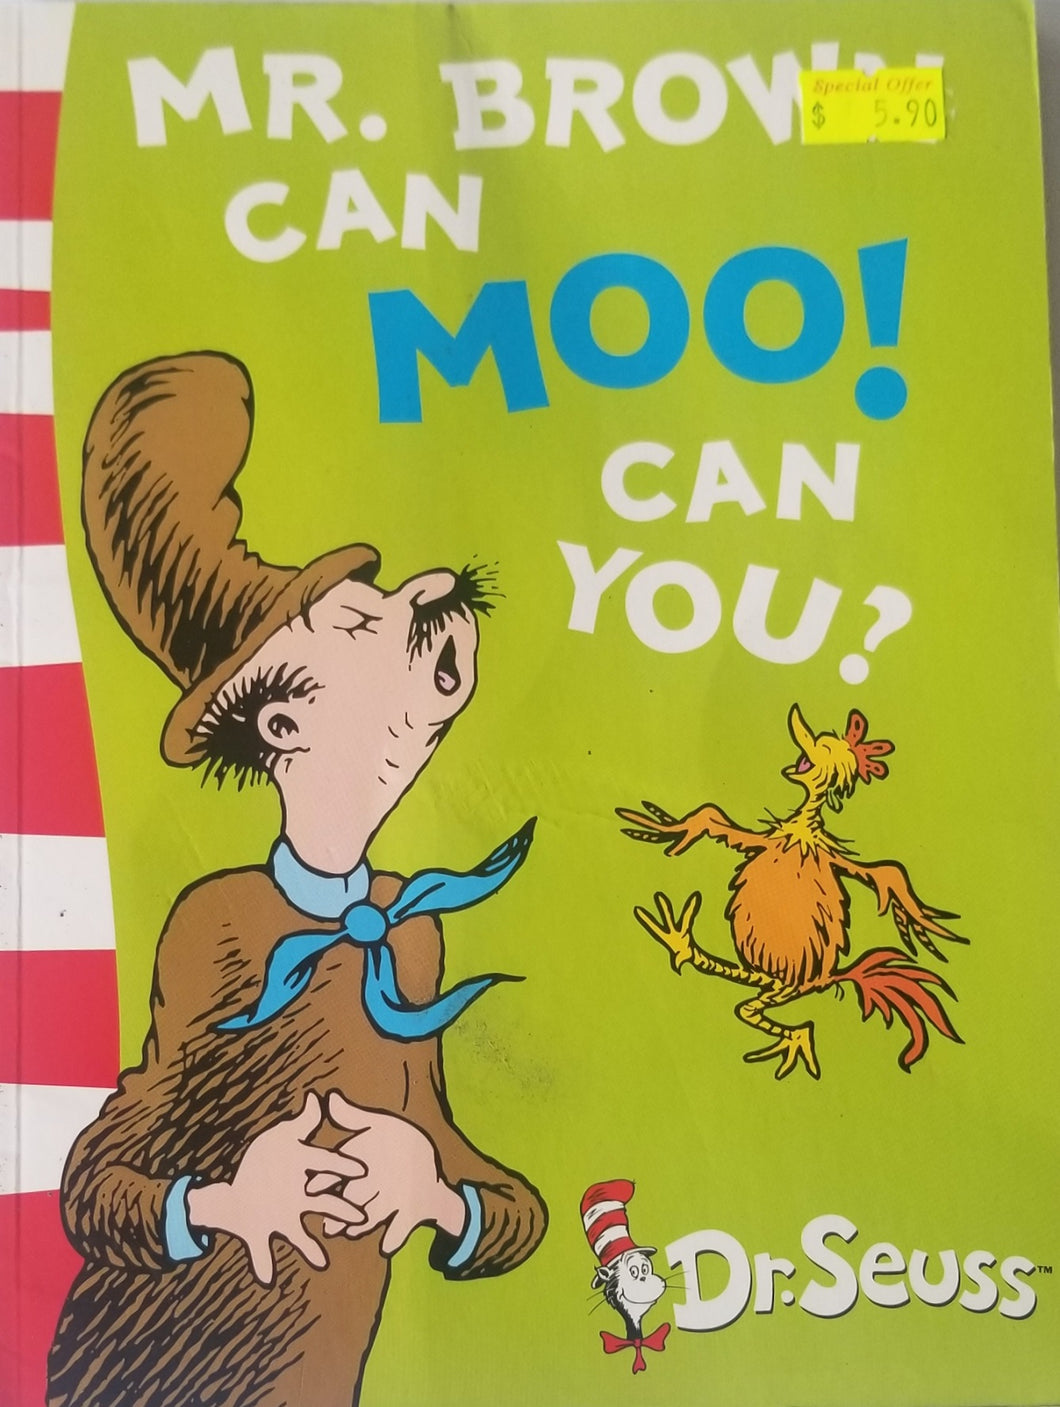 Mr. Brown Can Moo! Can you? - Dr. Seuss